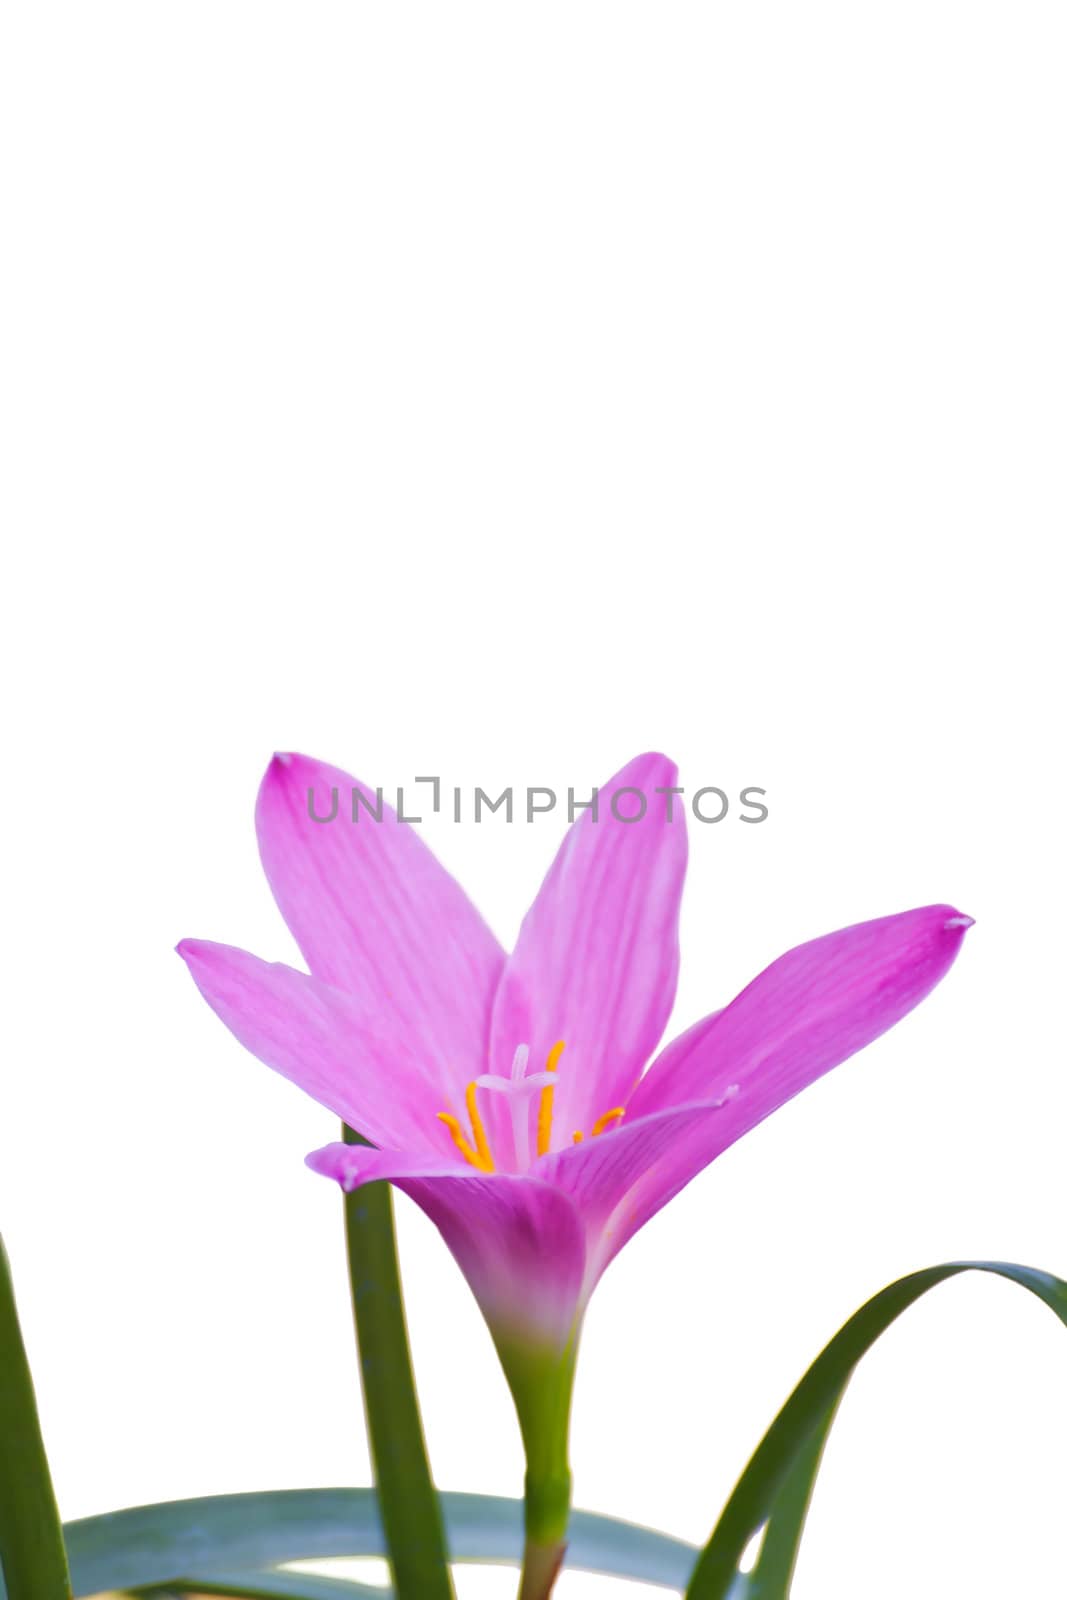 Fadjar's pink(Zephyranthes rosea, know as Rain Lily or Fairy Lily) blooming in rainy season